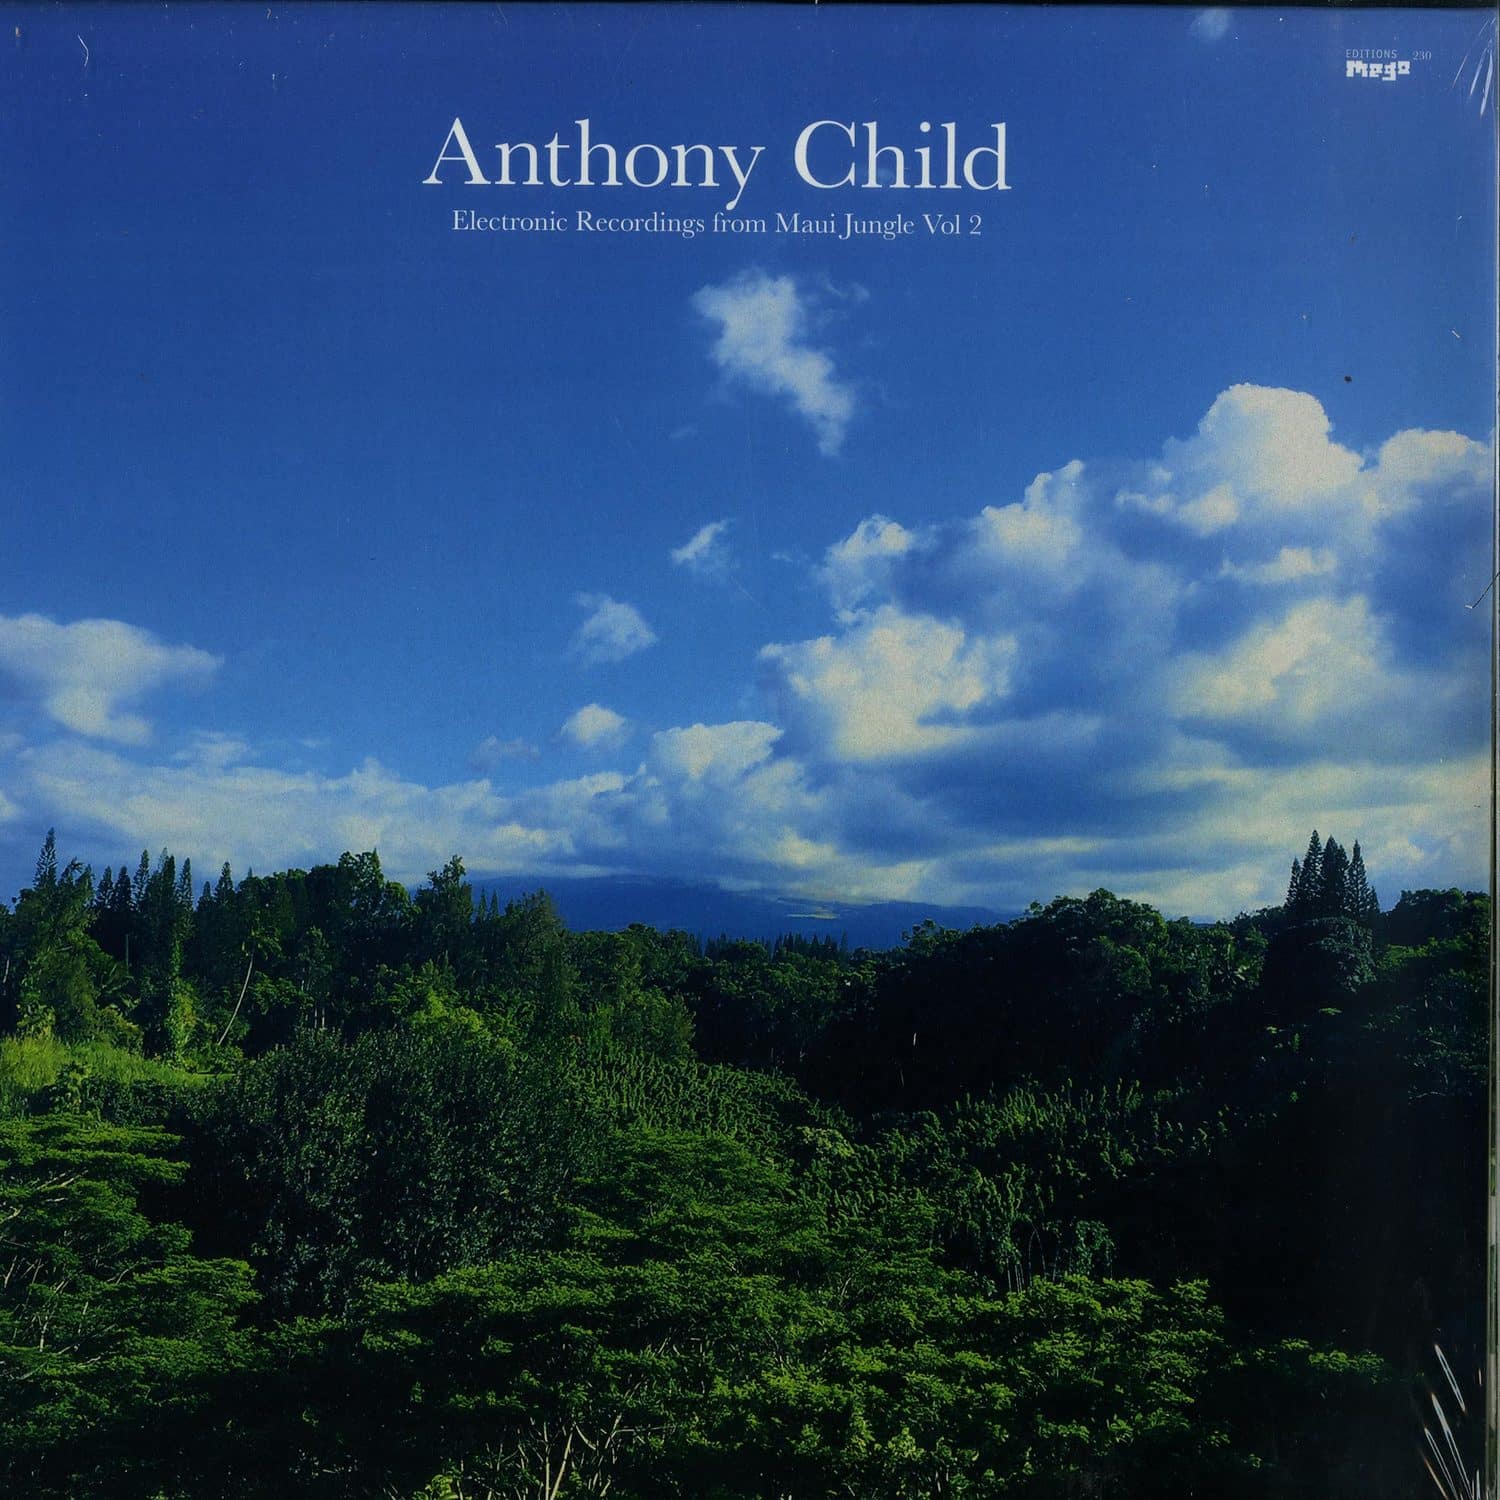 Anthony Child - ELECTRONIC RECORDINGS FROM MAUI JUNGLE VOL 2 